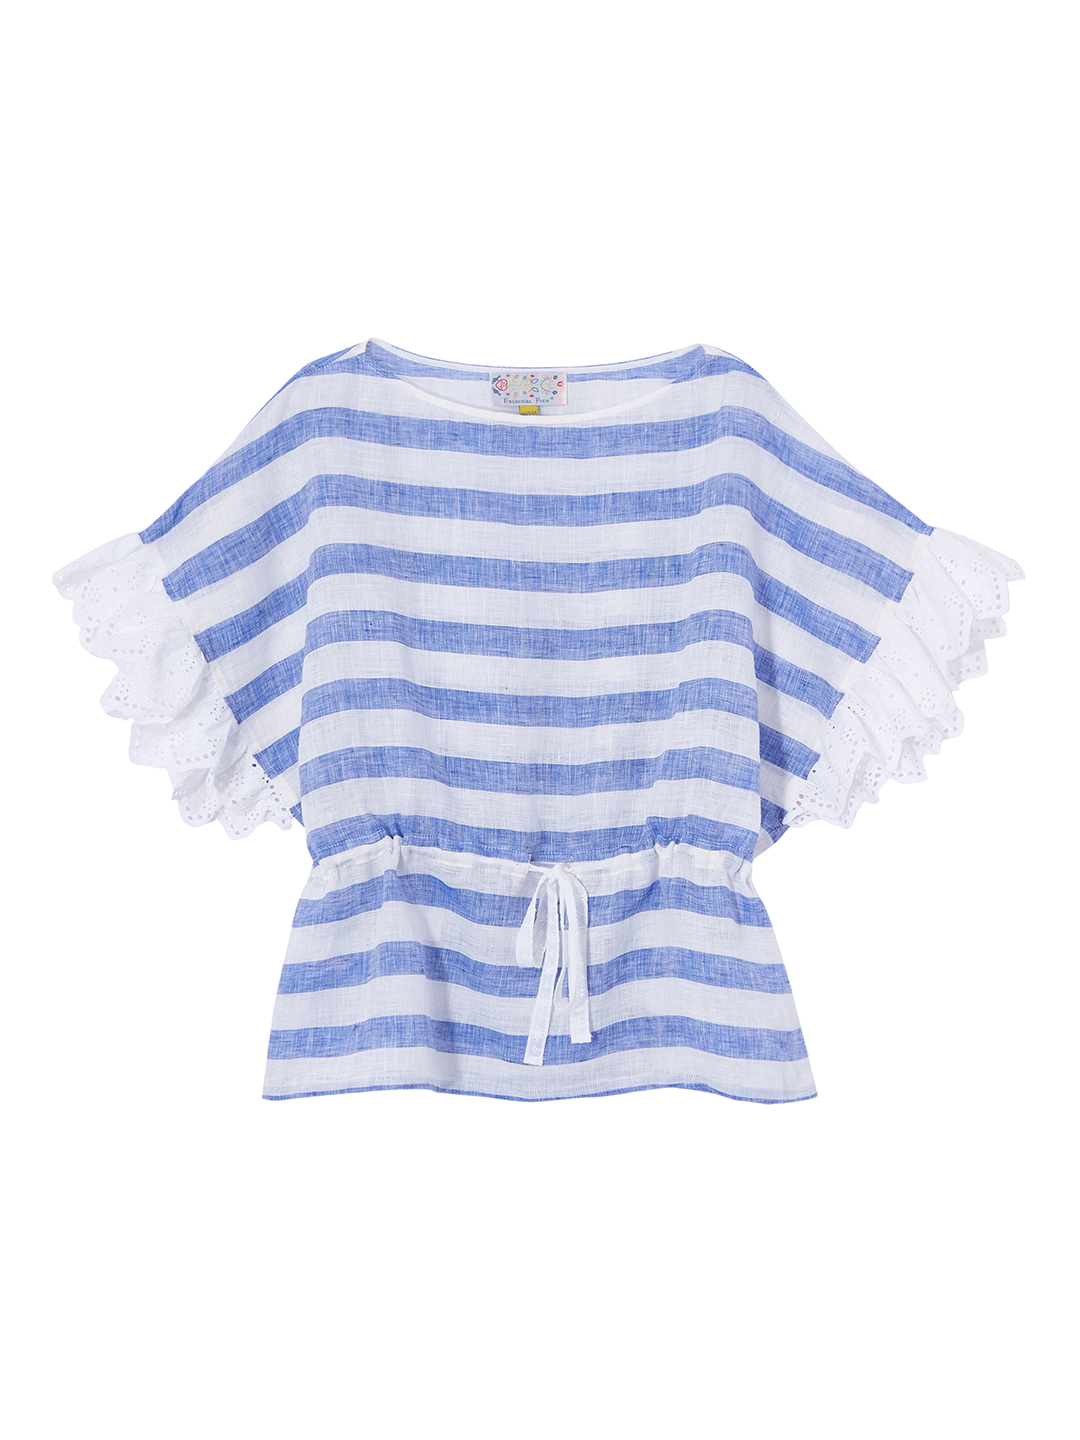 Unlogical Poem Embroidery Breton Blouse Flax Top